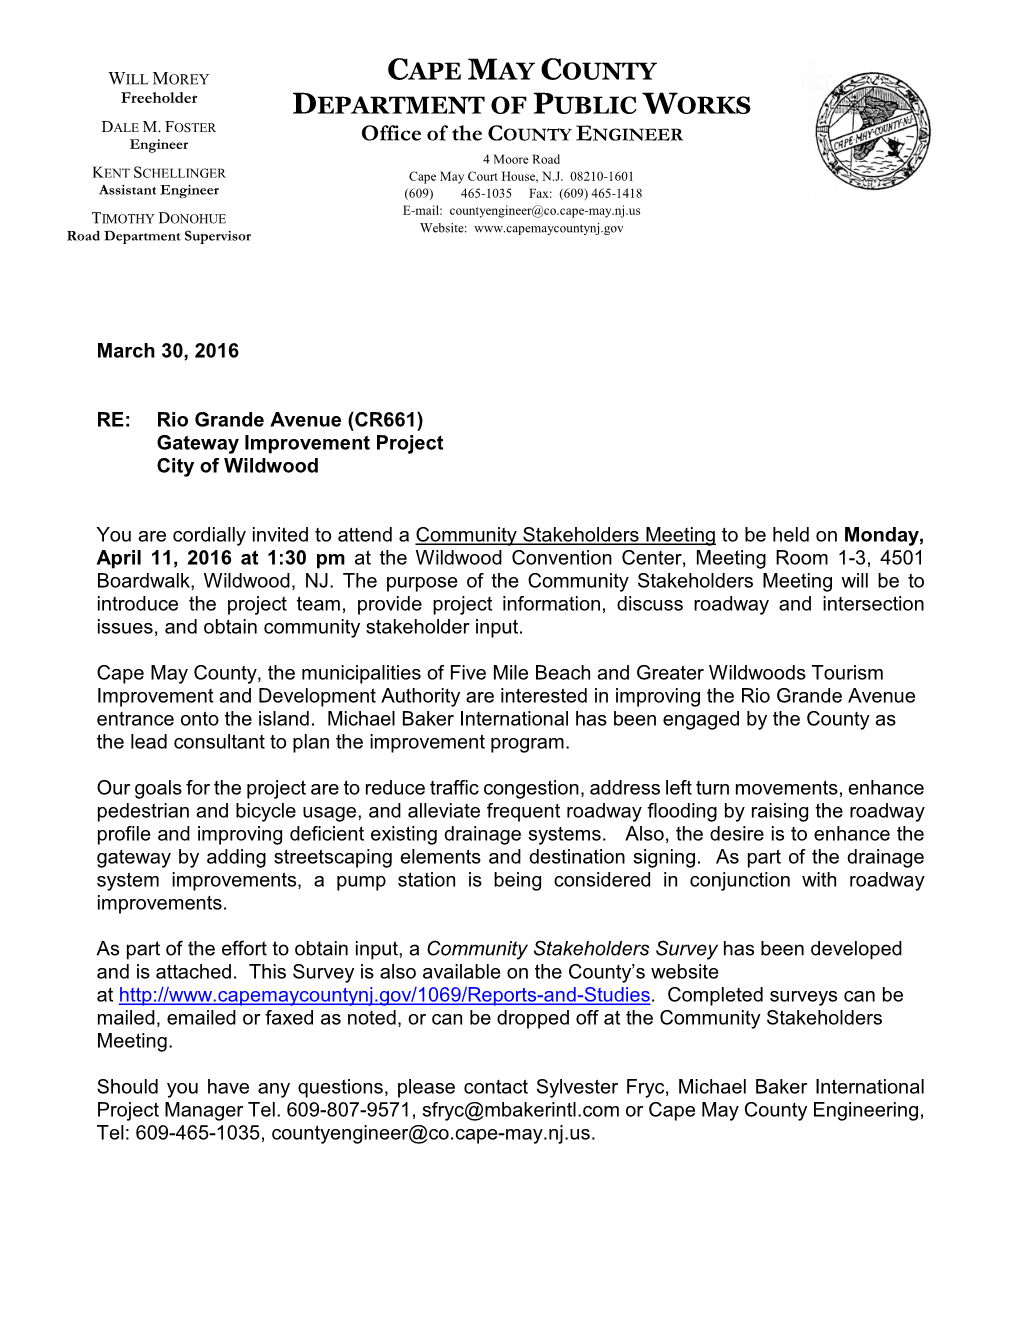 Cape May County Department of Public Works, Office of the County Engineer RE: Rio Grande Avenue Community Stakeholders Survey